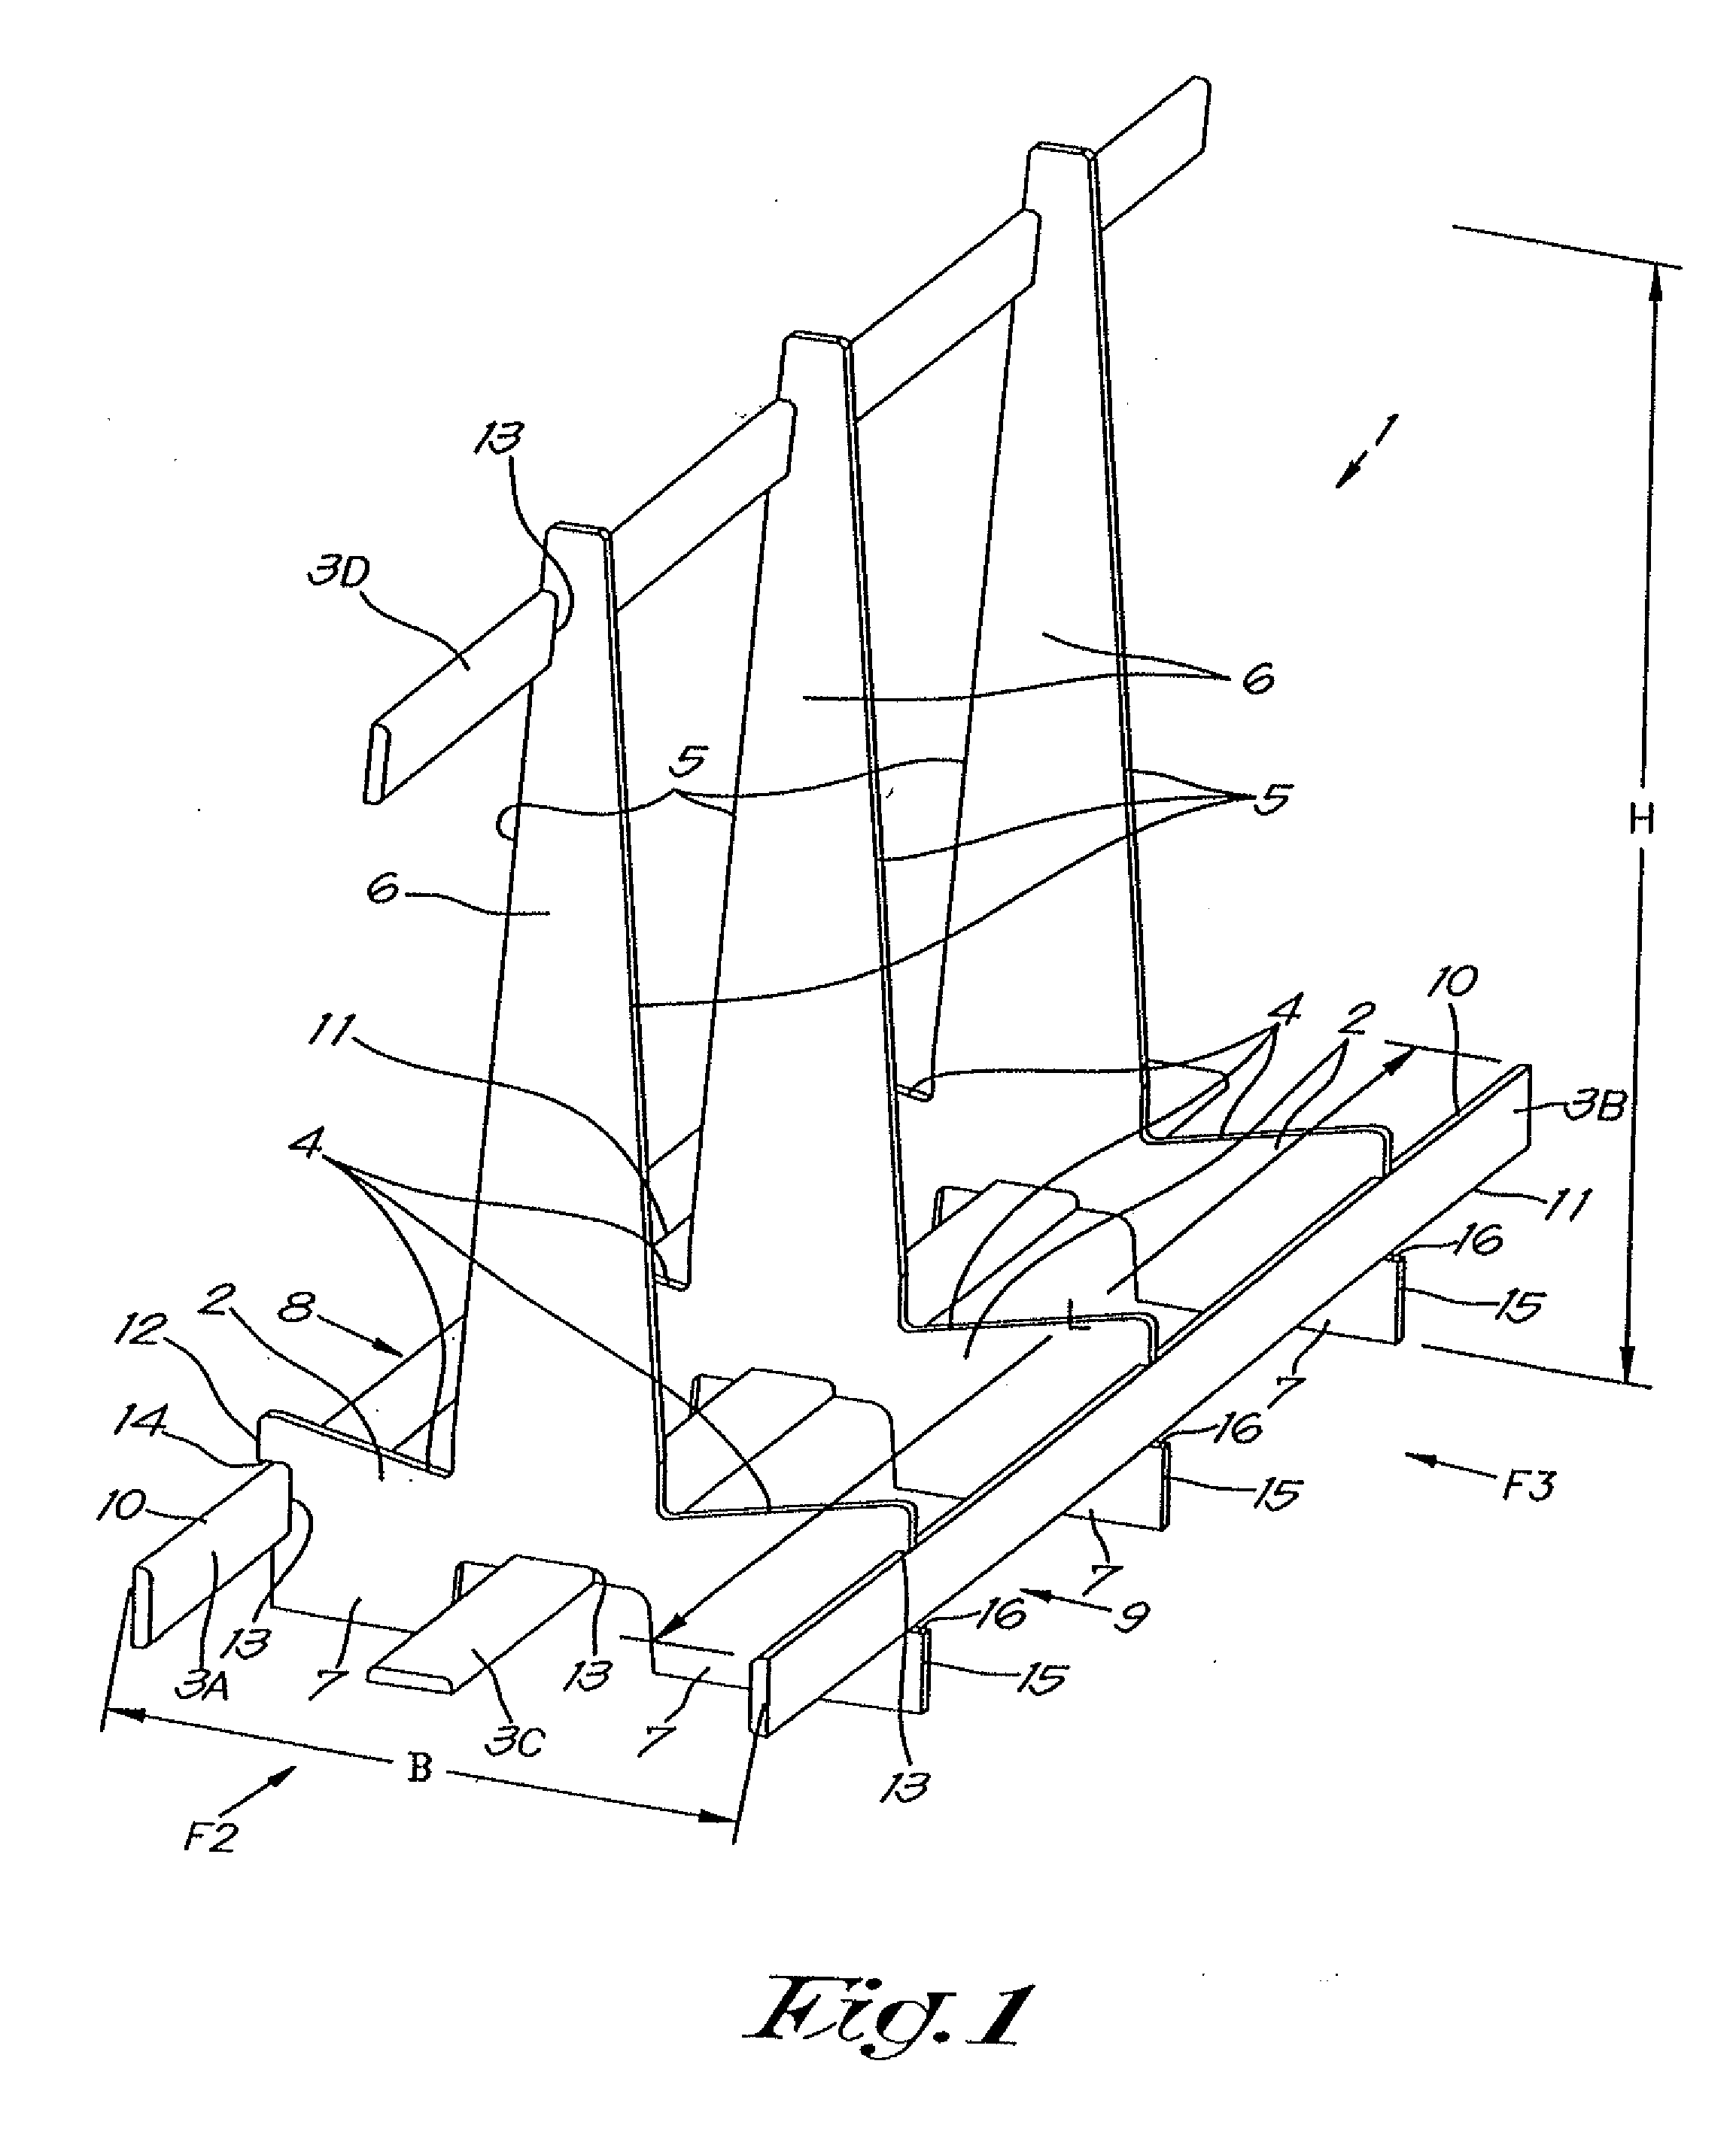 Element for the storage, handling and transport of essentially sheet-form objects